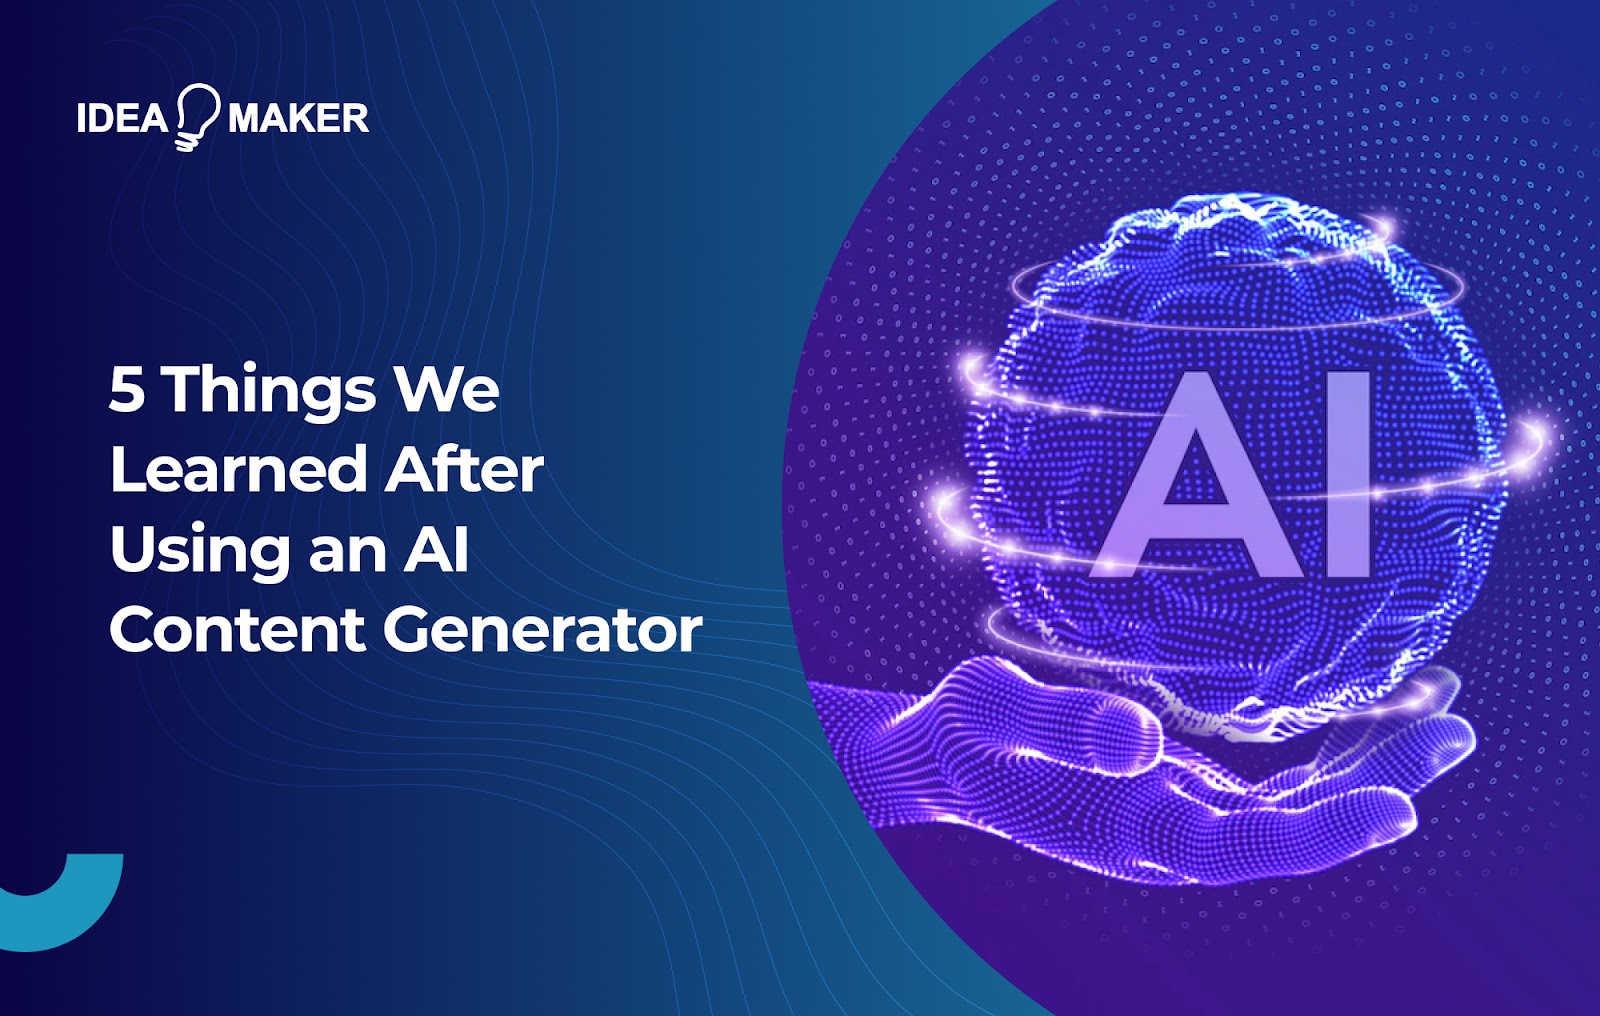 Ideamaker - 5 Things We Learned After Using an AI Content Generator